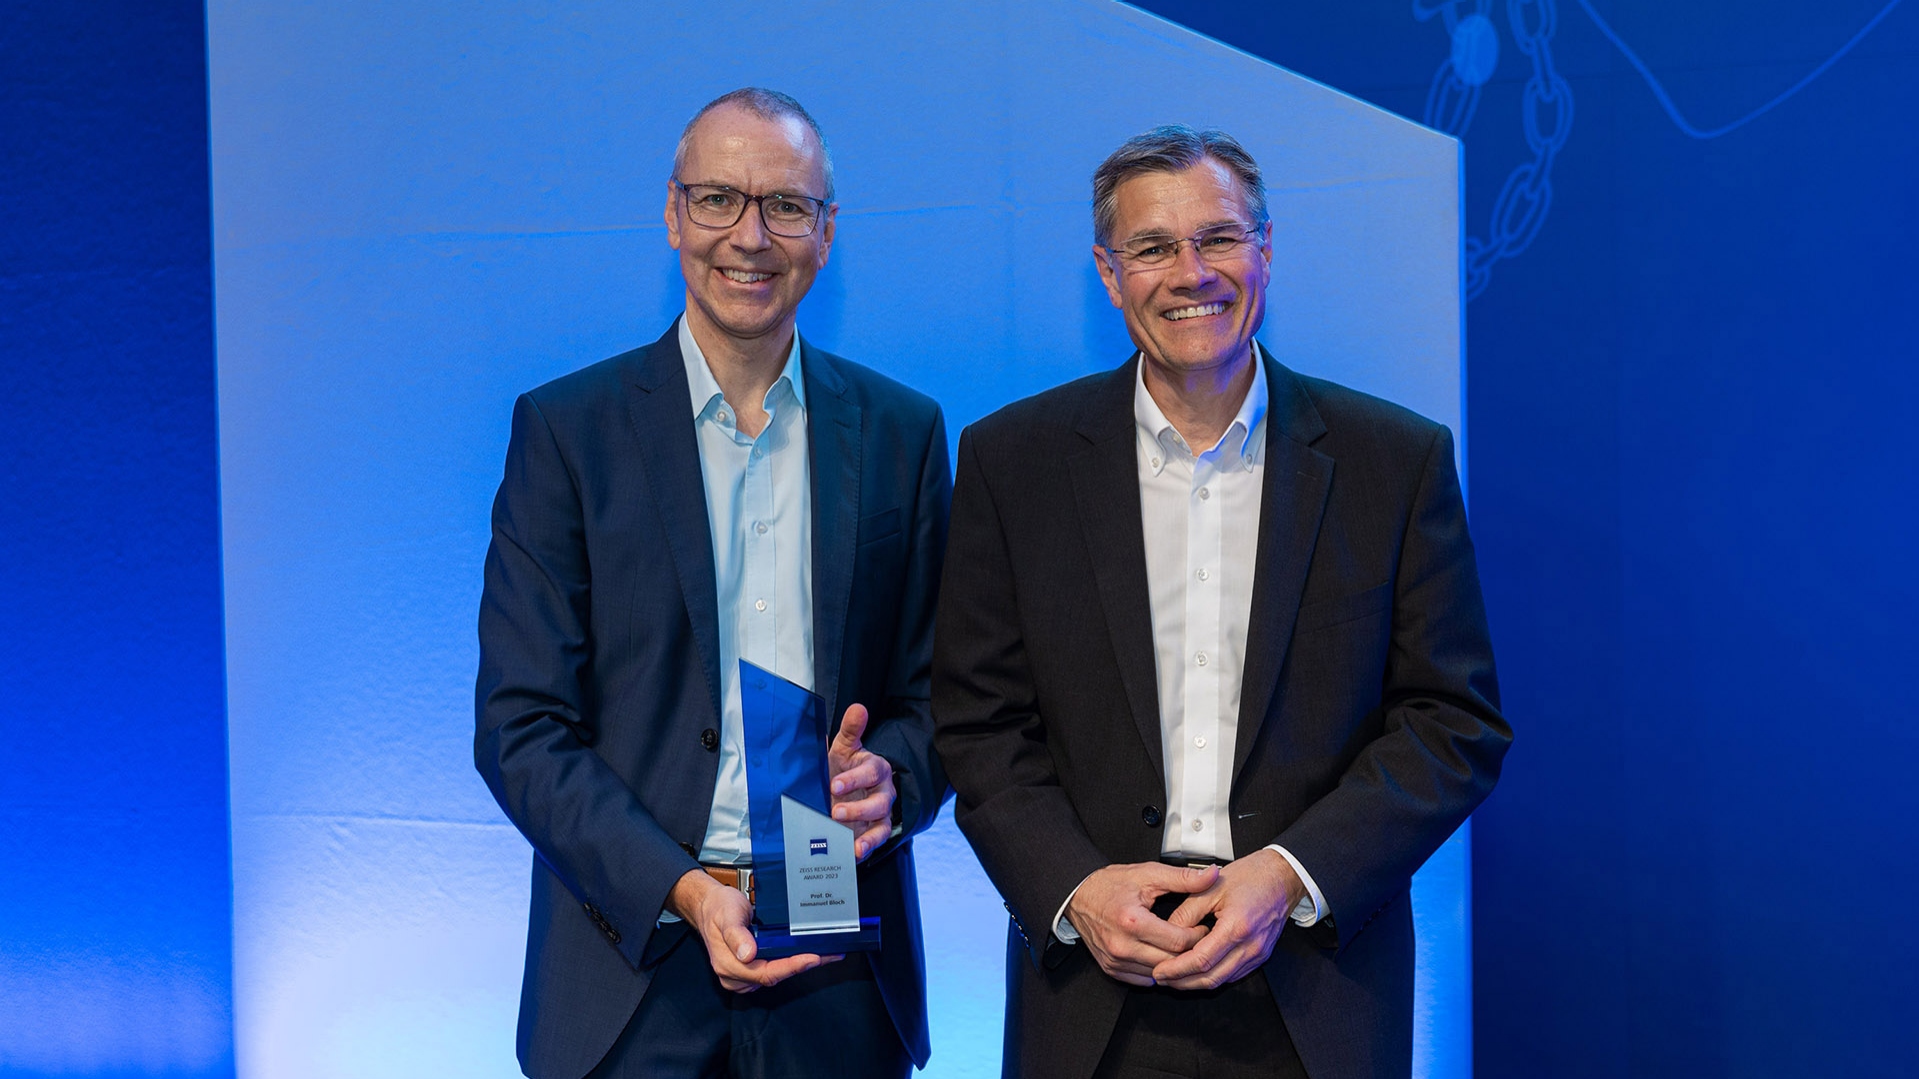 Prof. Dr. Immanuel Bloch, winner of this year's ZEISS Research Award and Dr. Karl Lamprecht, ZEISS CEO.